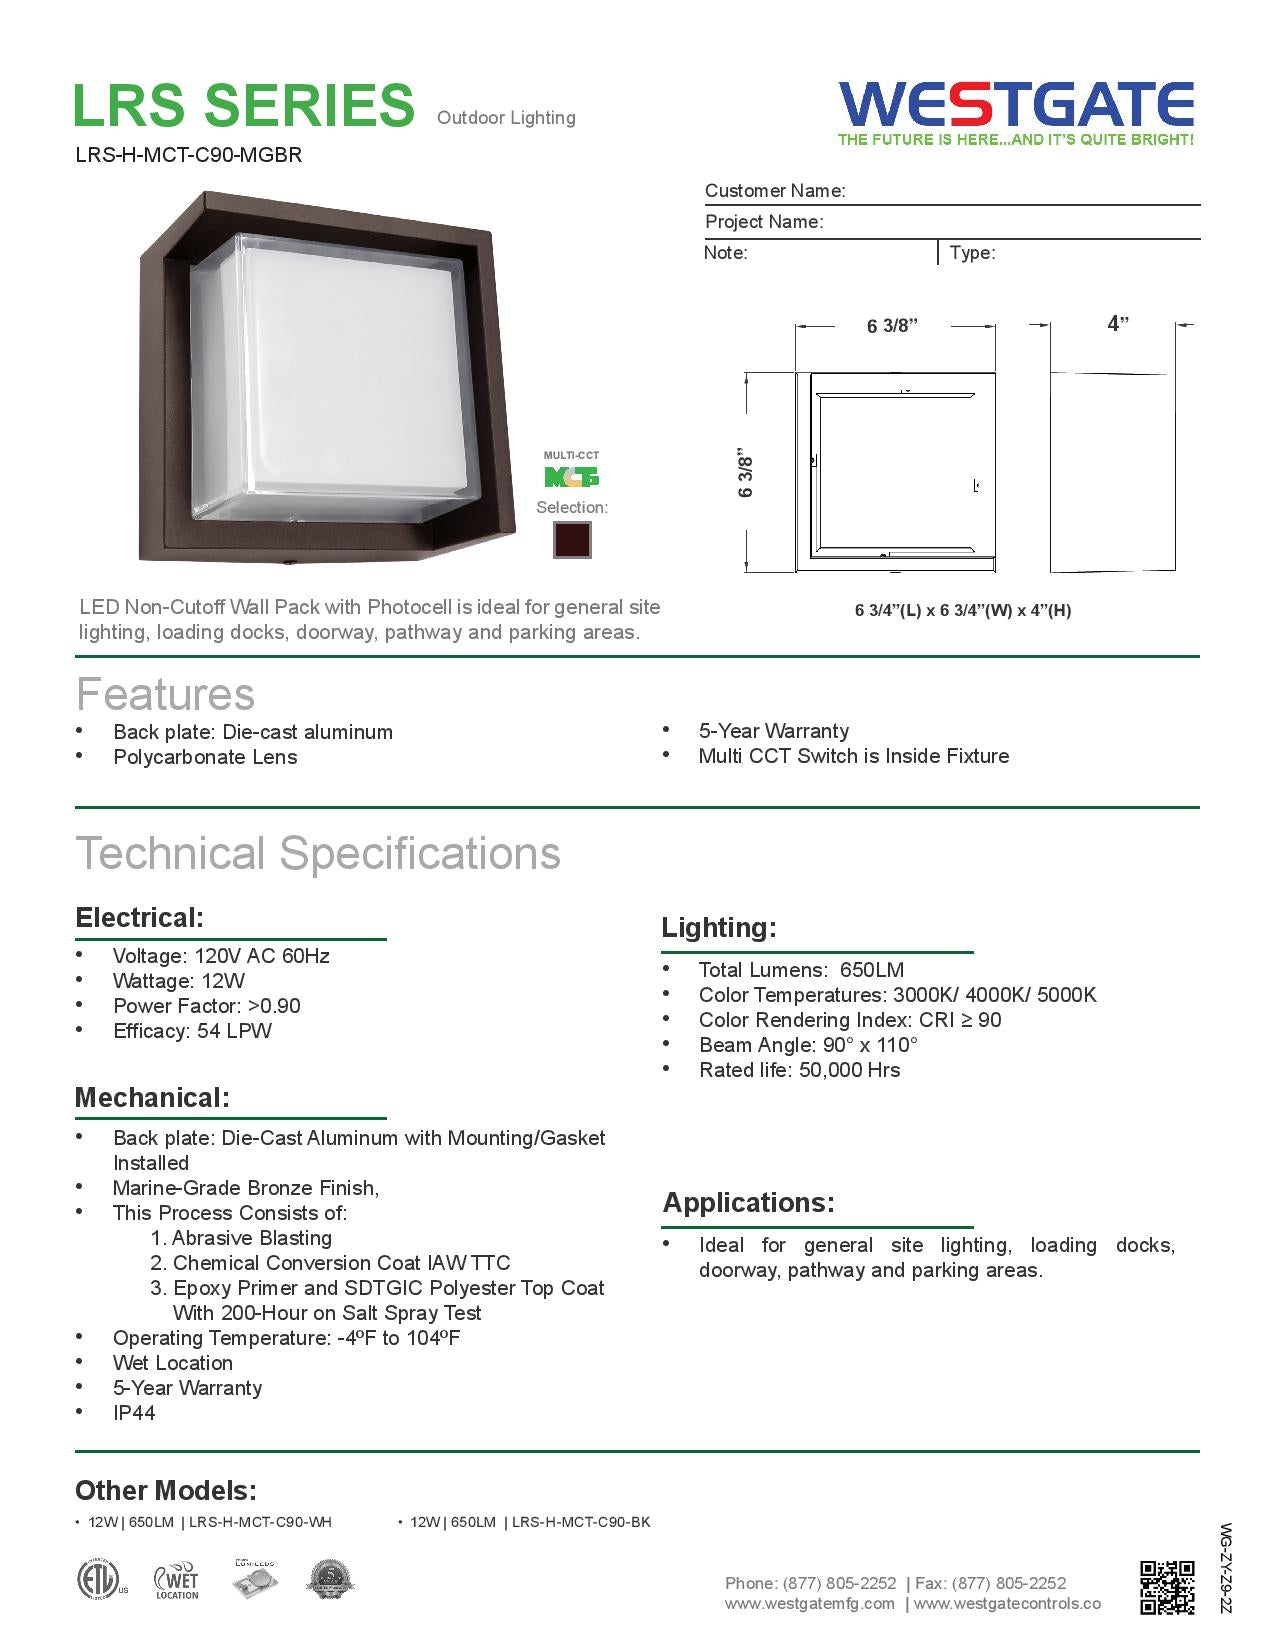 WESTGATE LRS-H LED Multi-CCT Architectural Wall Light With Dual Lens